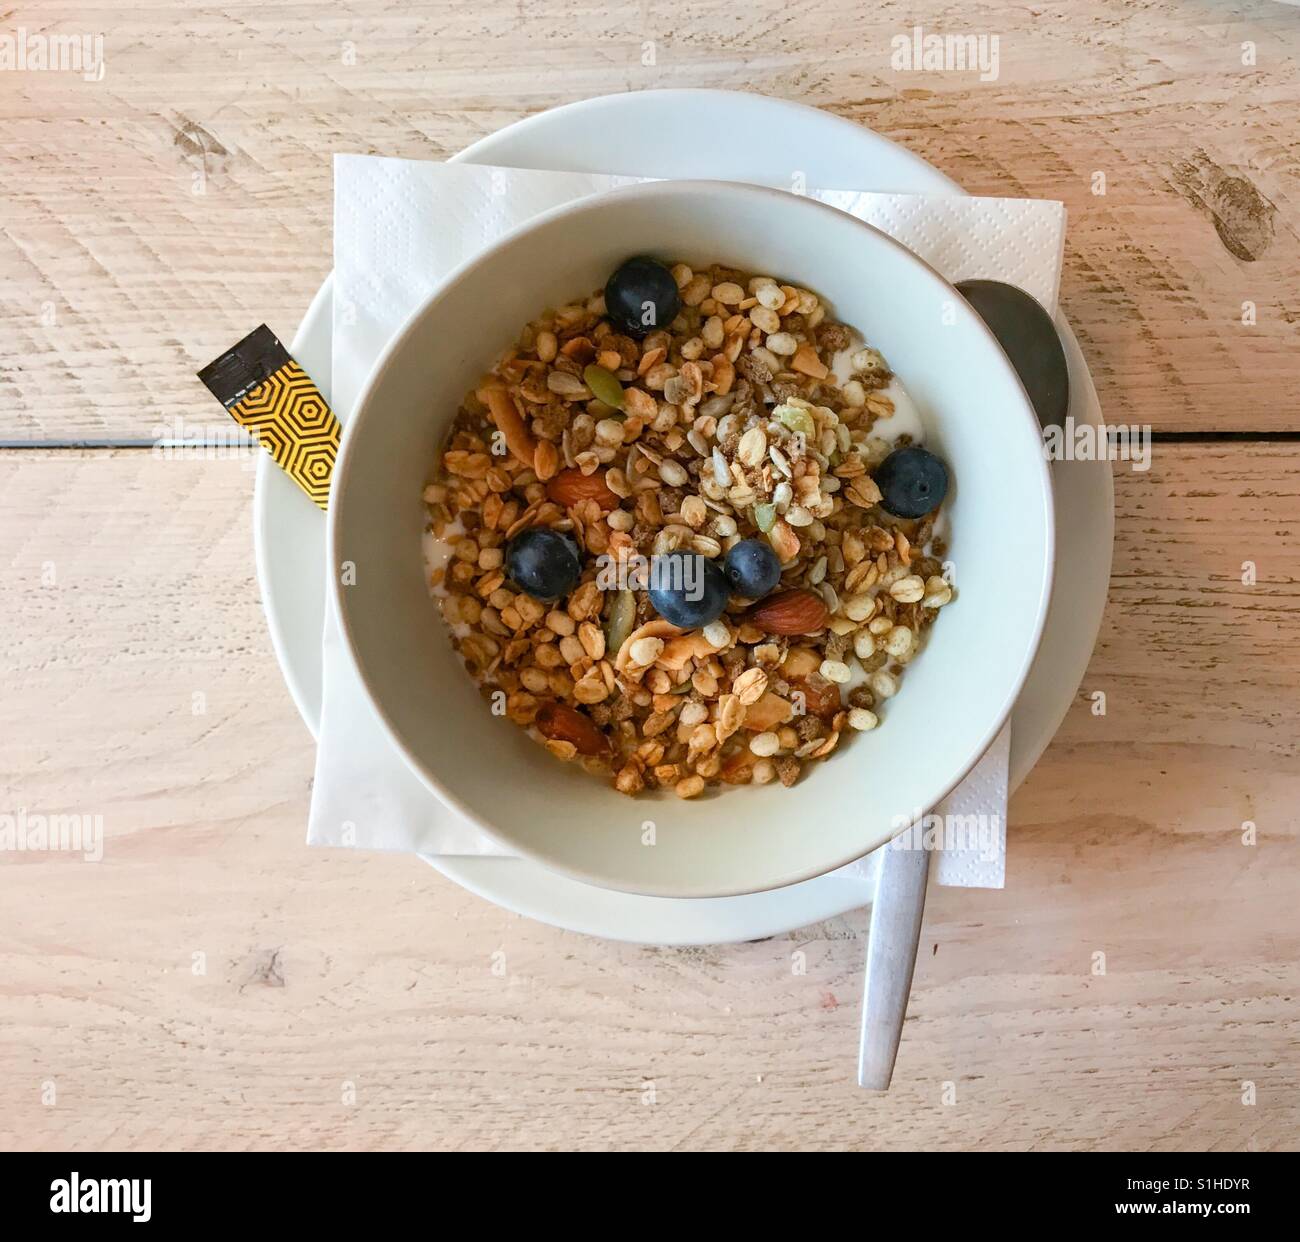 Bowl of cereal for breakfast Stock Photo